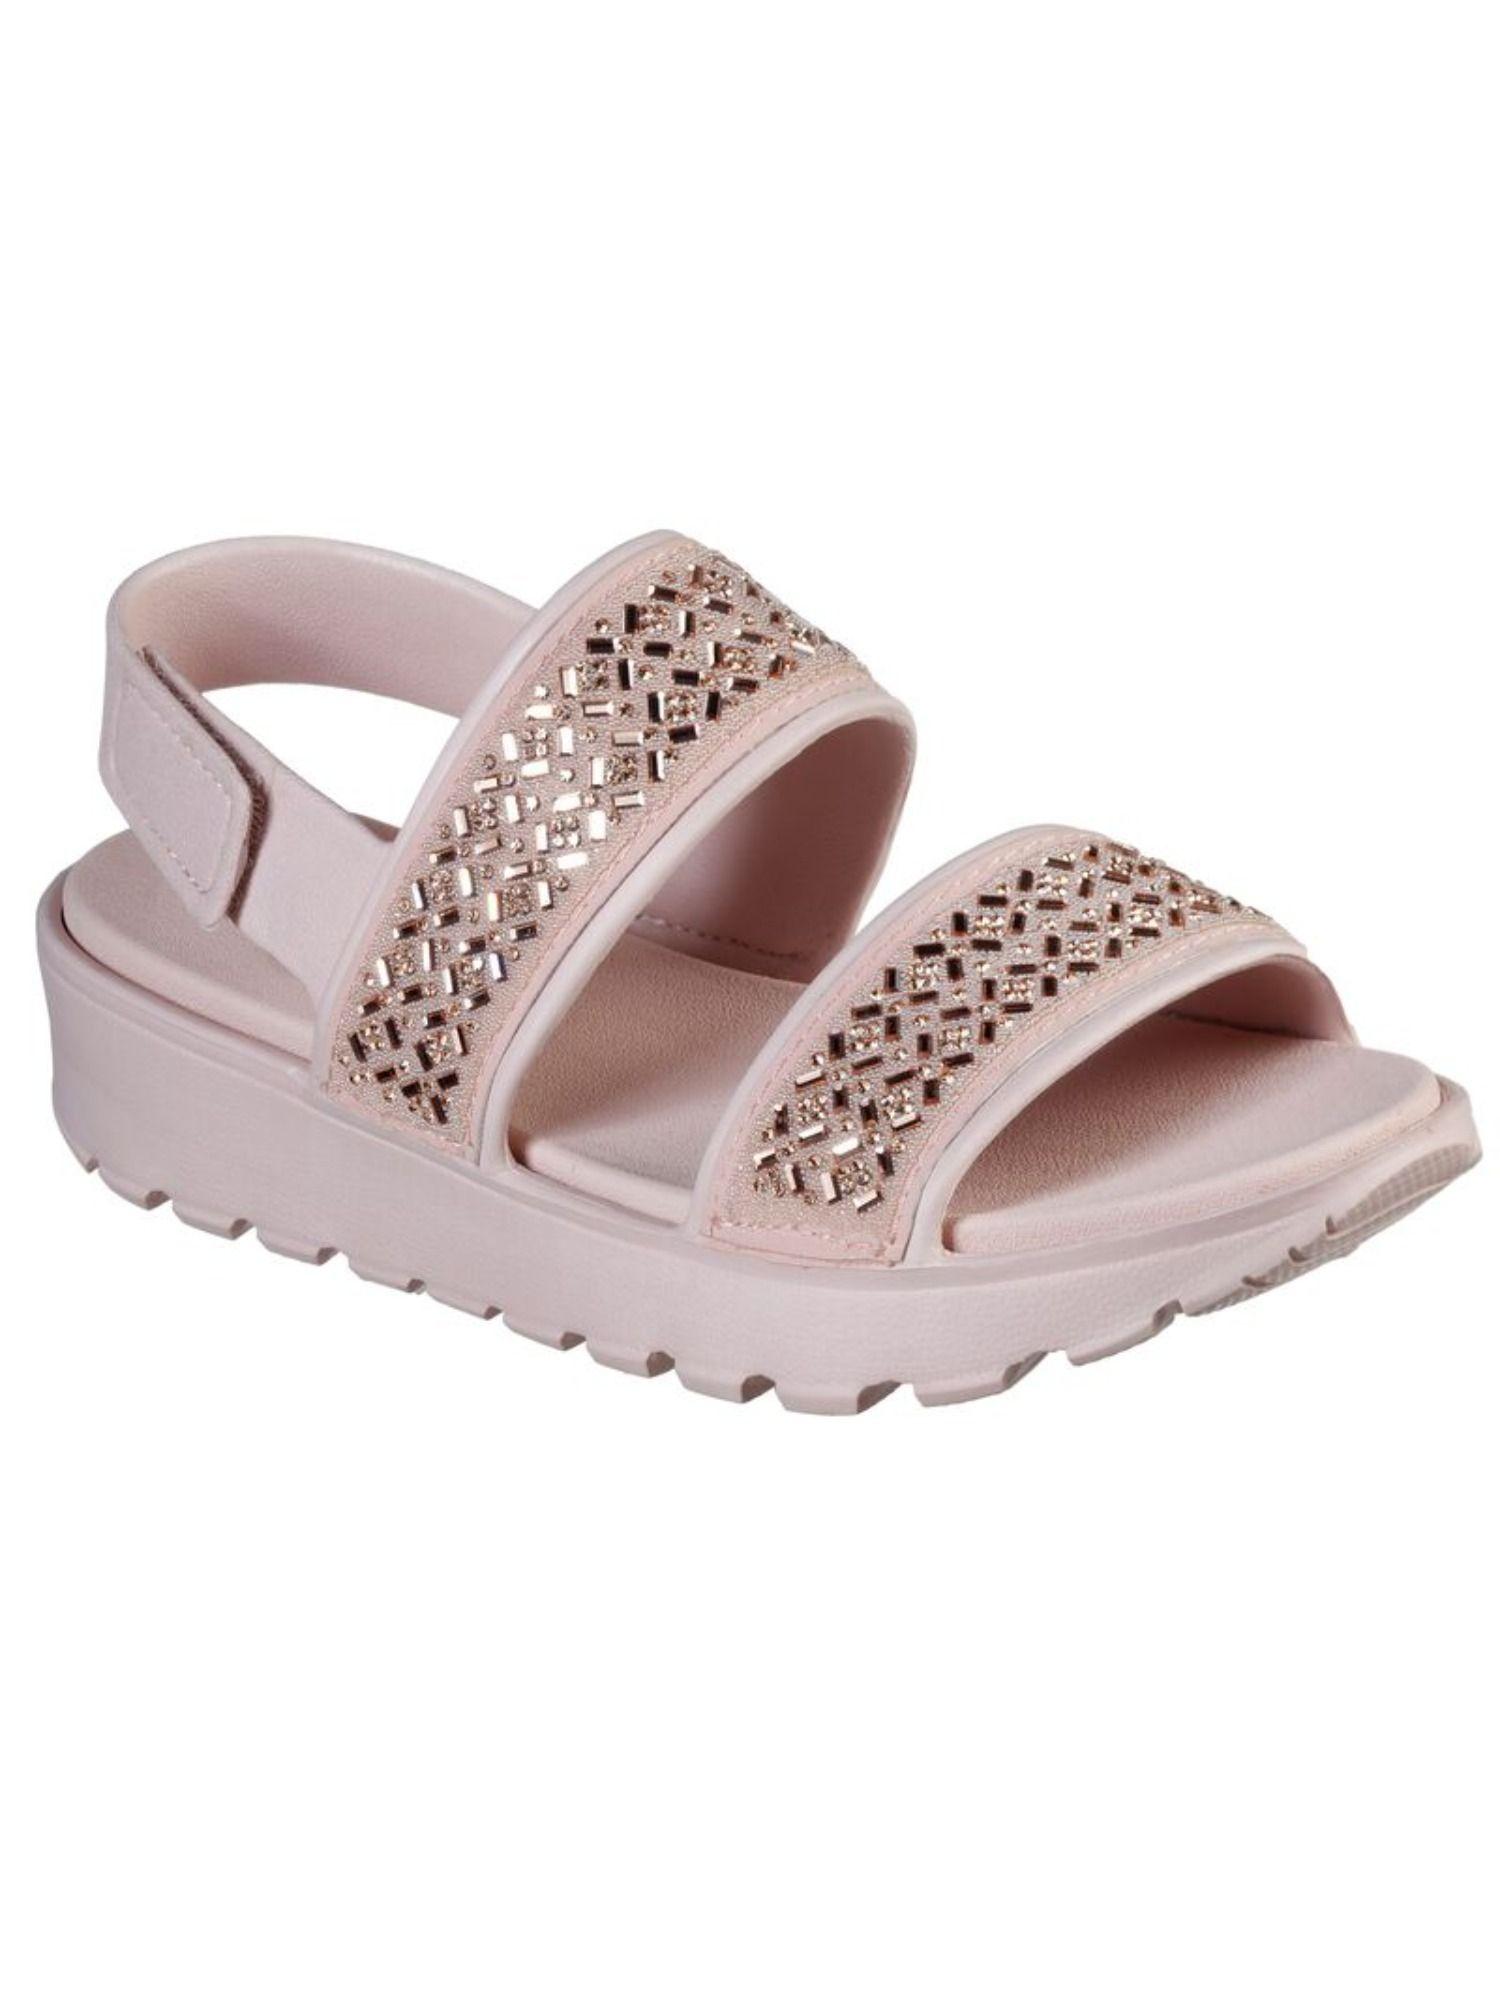 footsteps - glam party pink foamies sandals